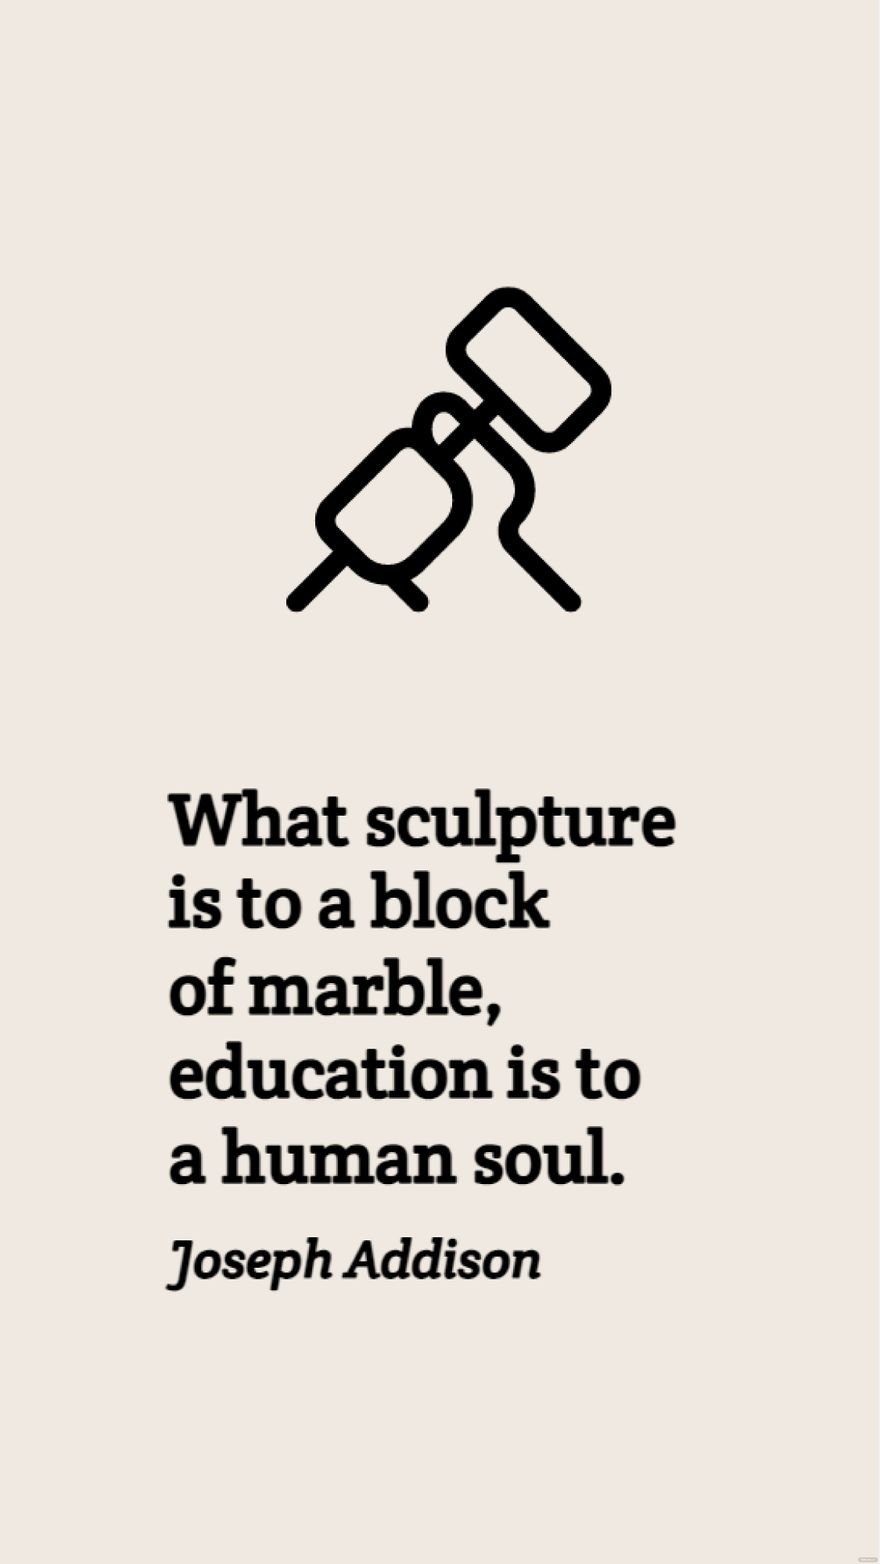 Free Joseph Addison - What sculpture is to a block of marble, education is to a human soul. in JPG